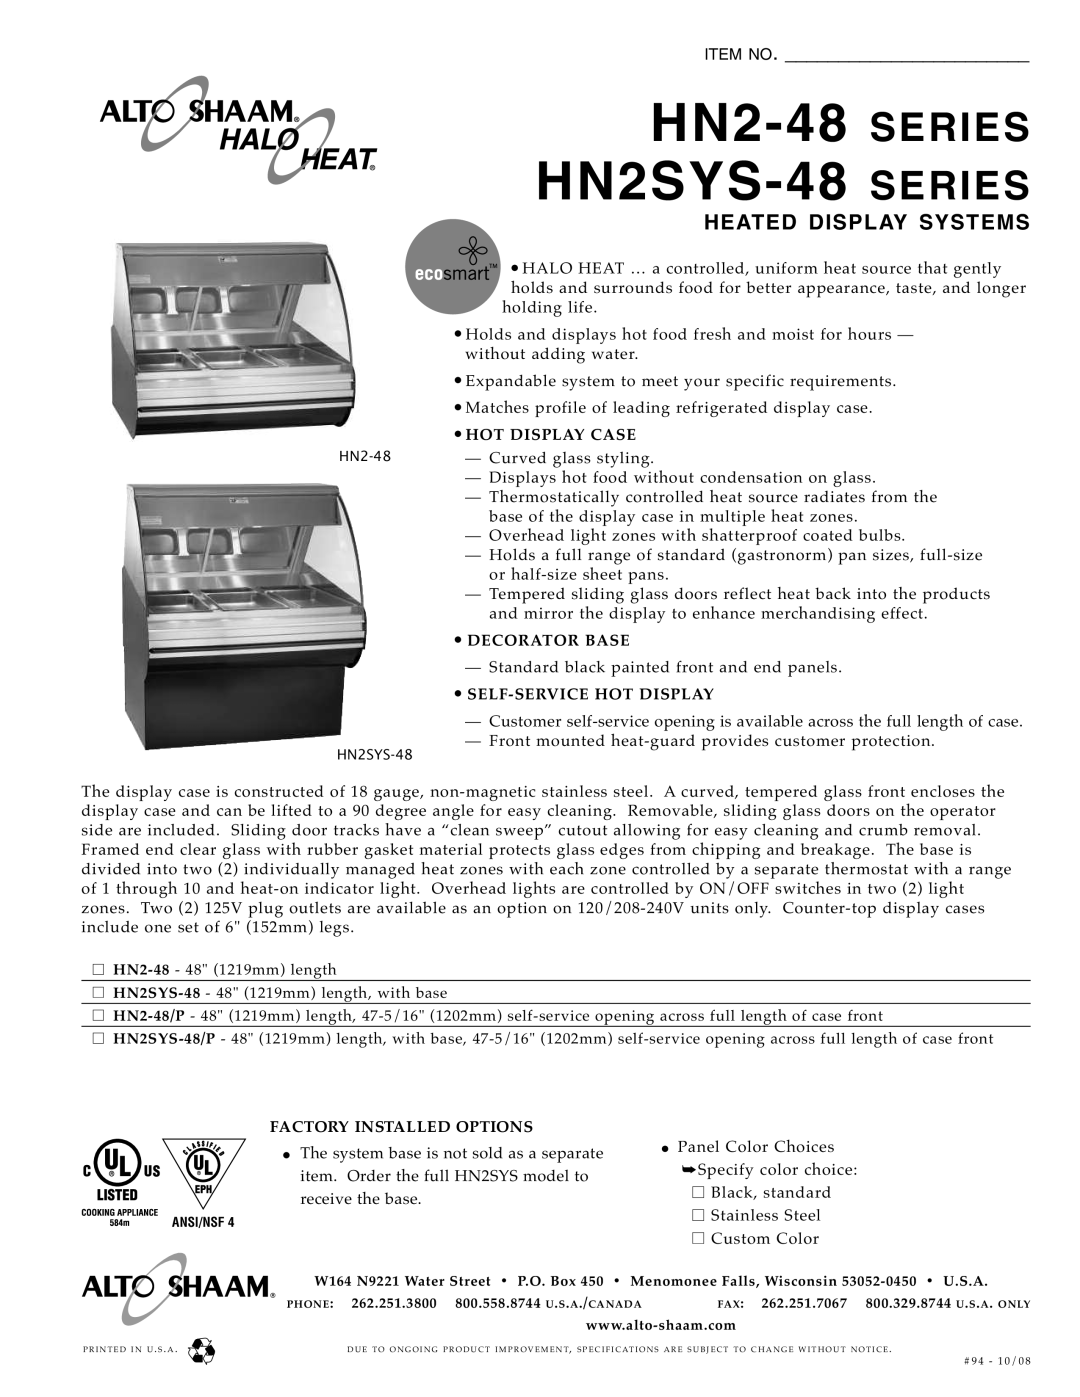 Alto-Shaam HN2SYS-48/P, HN2-48/P specifications HN2-48HN2S YS-48, Series Series, Item No, Heated Display Syste Ms 